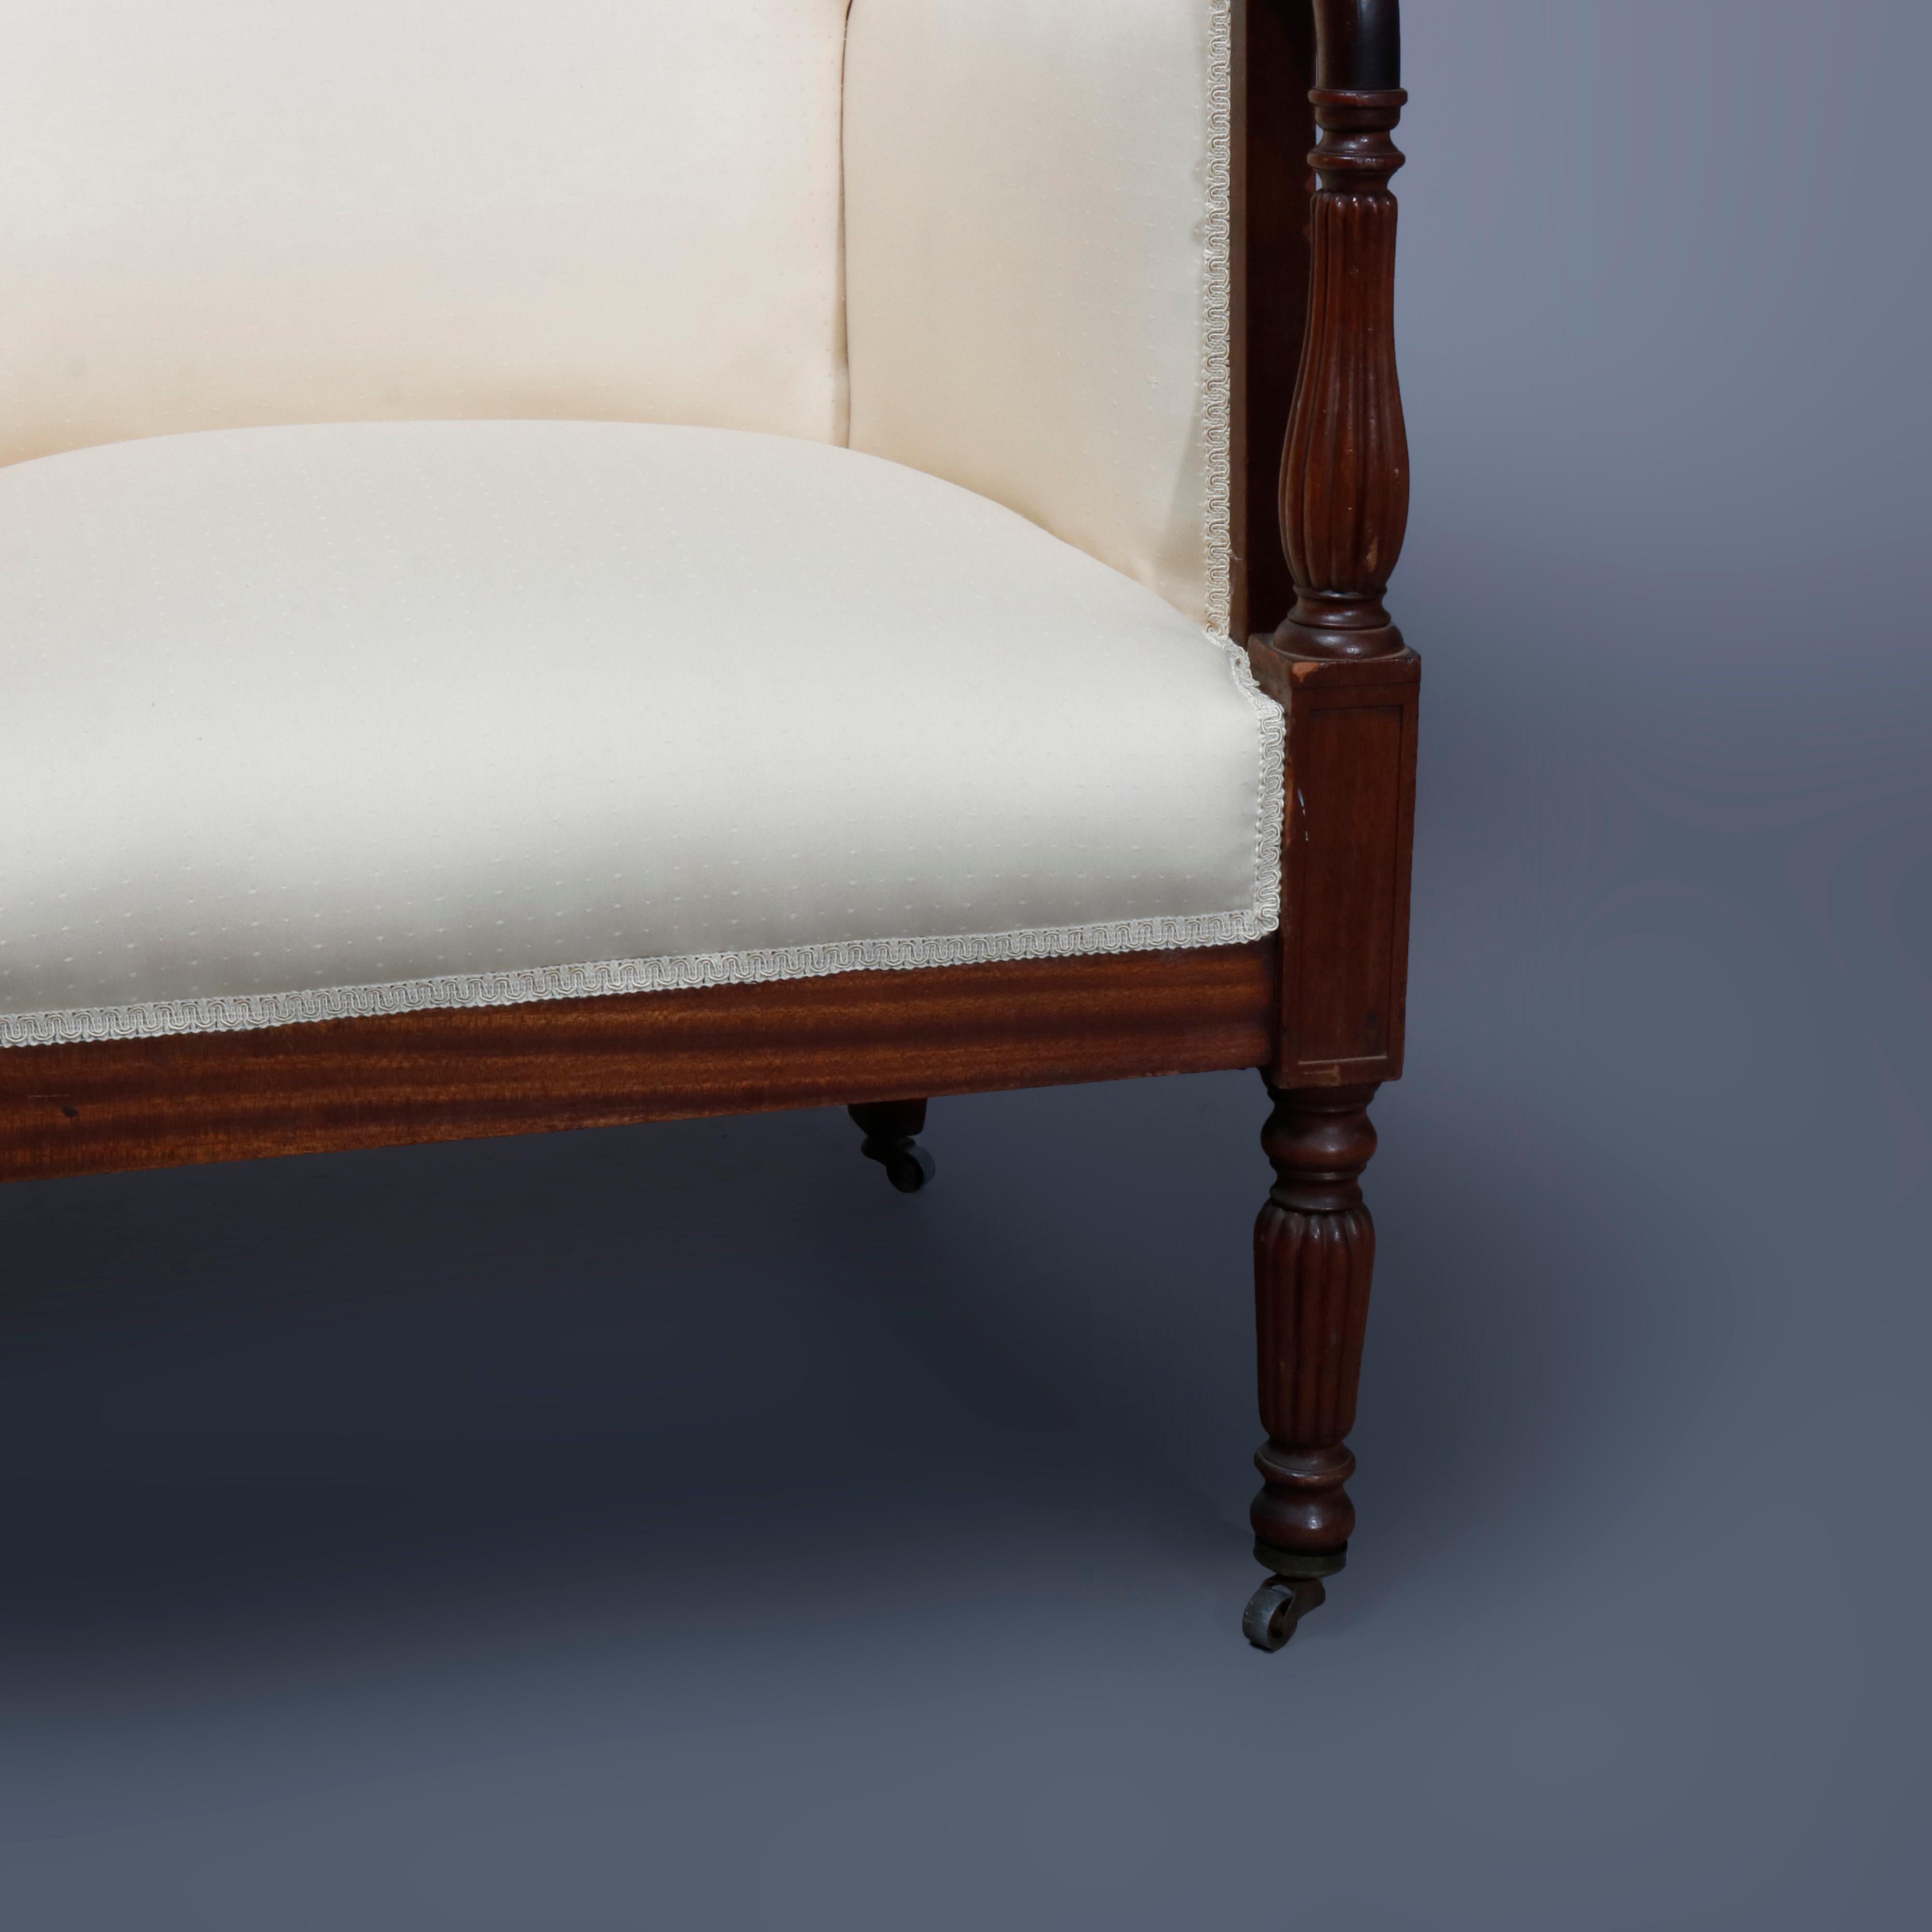 Antique Period Sheraton Mahogany Fireside Upholstered Wingback Chair, circa 1830 1